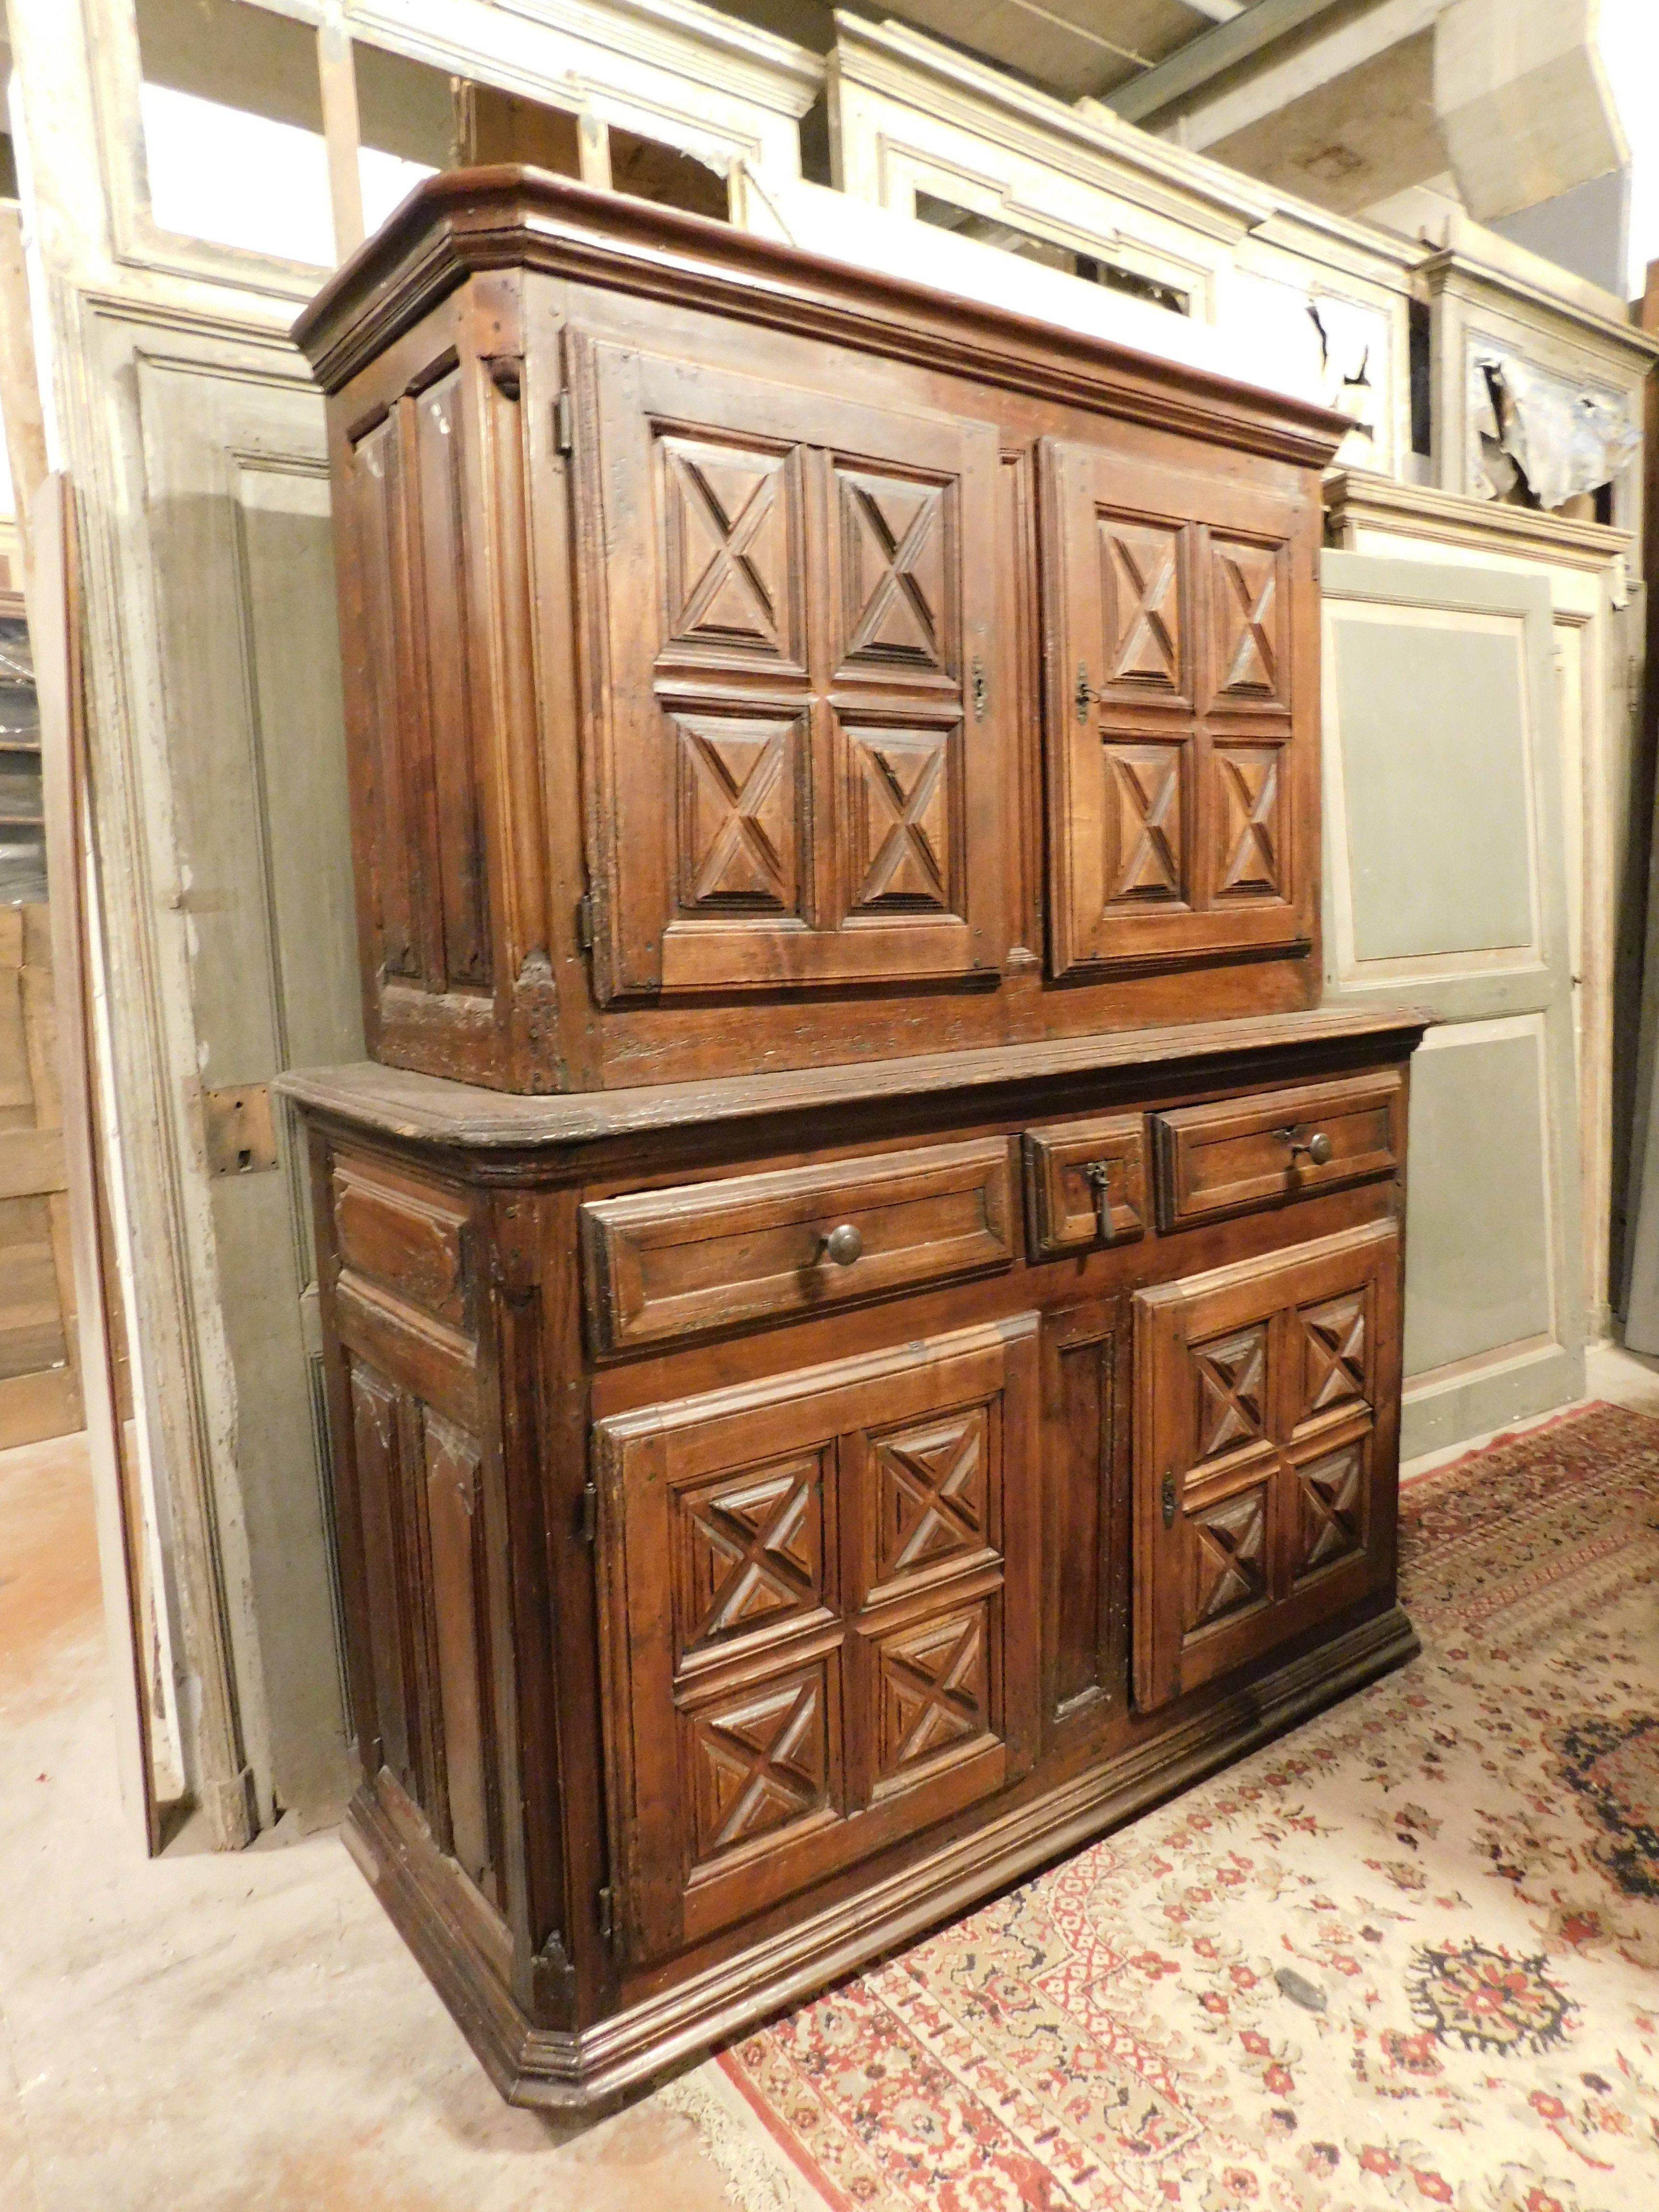 Antique Sideboard cabinet, double-bodied with richly carved lozenge doors, carved sides, with doors and drawers, built of cherry and oak, from the period between '6/'700 of Piedmontese origin, very capacious and beautiful historical presence,